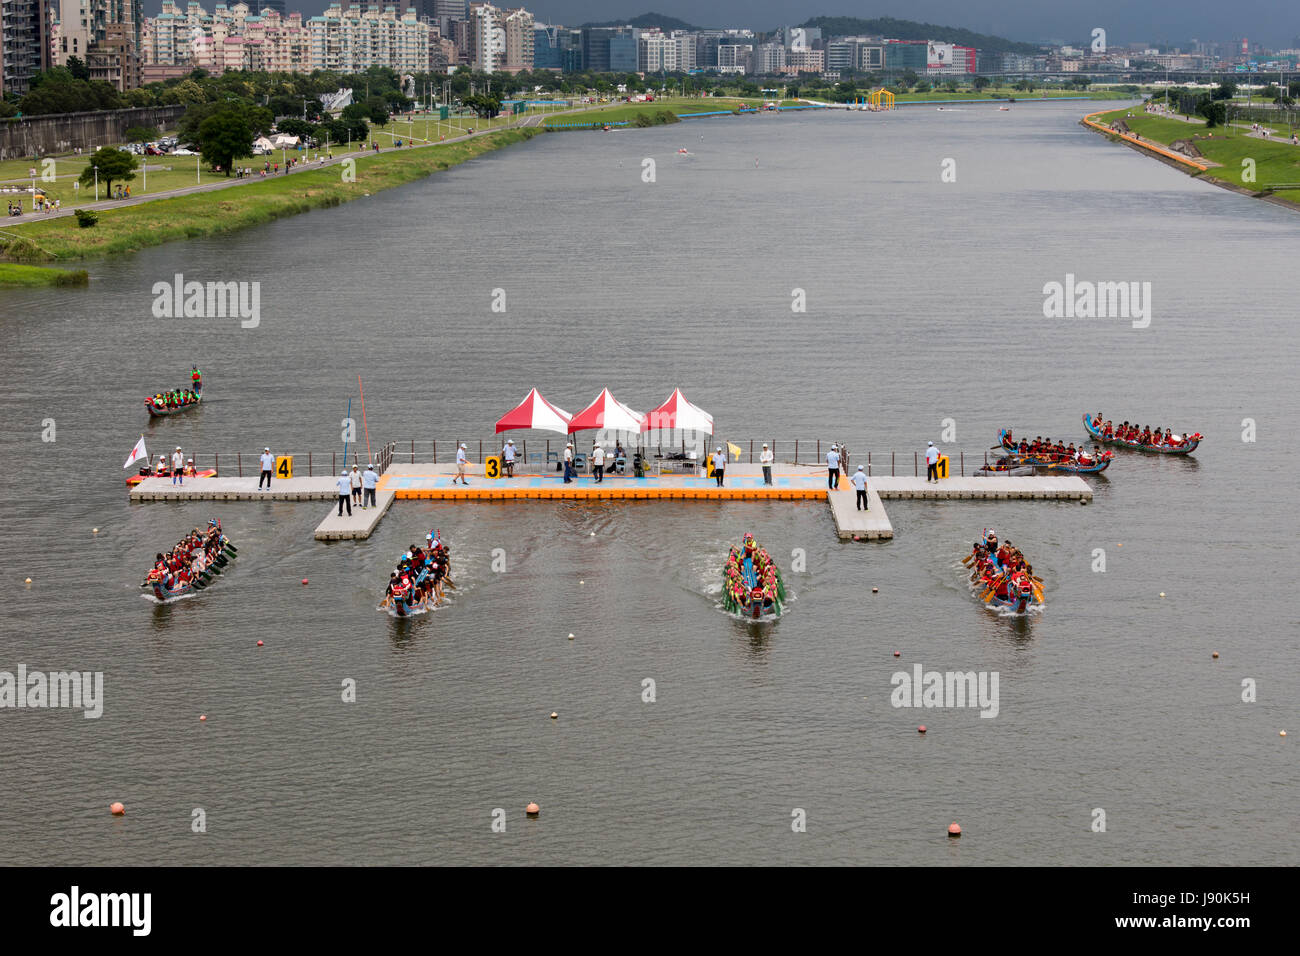 Taipei, Taiwan. 30th May, 2017. Four dragon boats leave the start platform as a heat begins at the dragon boat races that take place on Keelung River in Taipei every year on Duanwu Festival, better known as Dragon Boat Festival. Credit: Perry Svensson/Alamy Live News Stock Photo